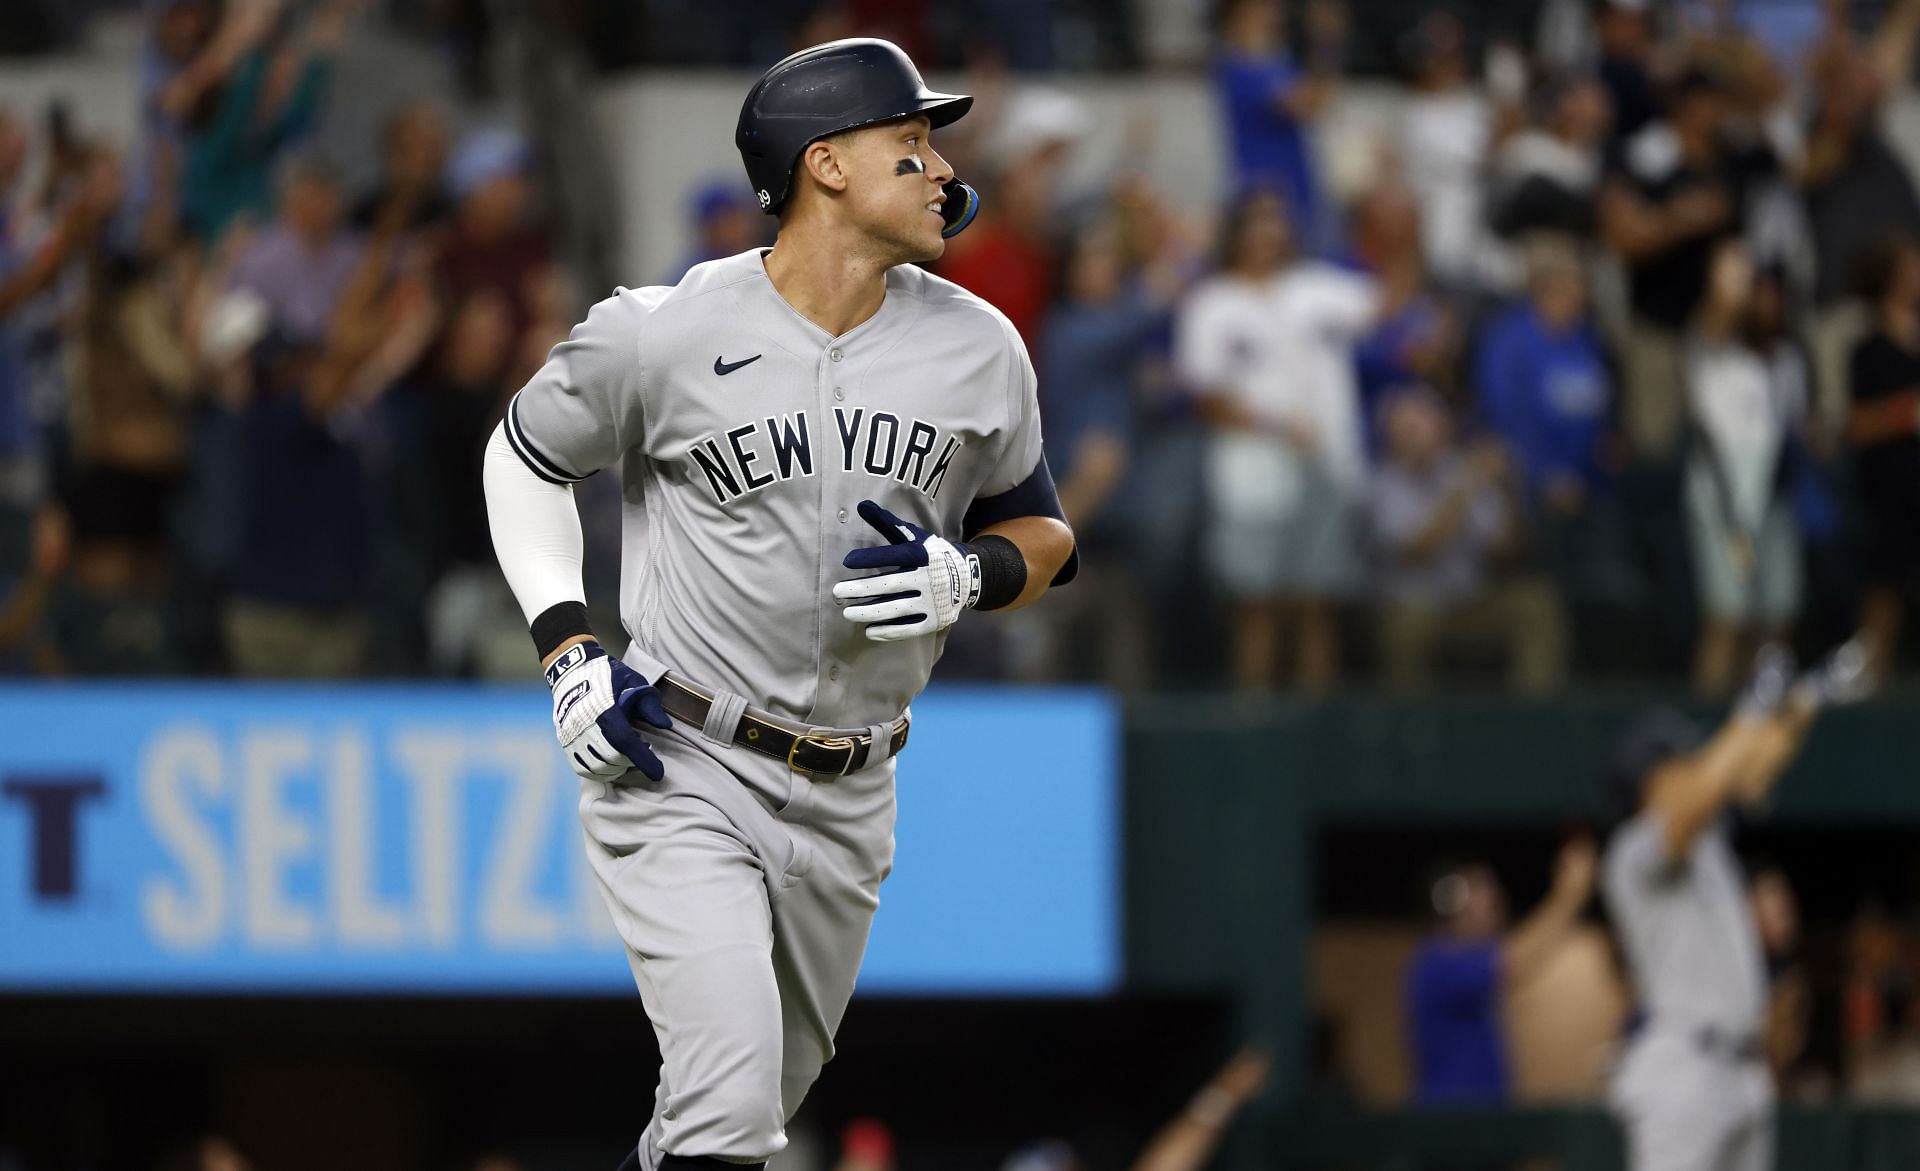 MLB Twitter reacts to Aaron Judge making history with home run 62